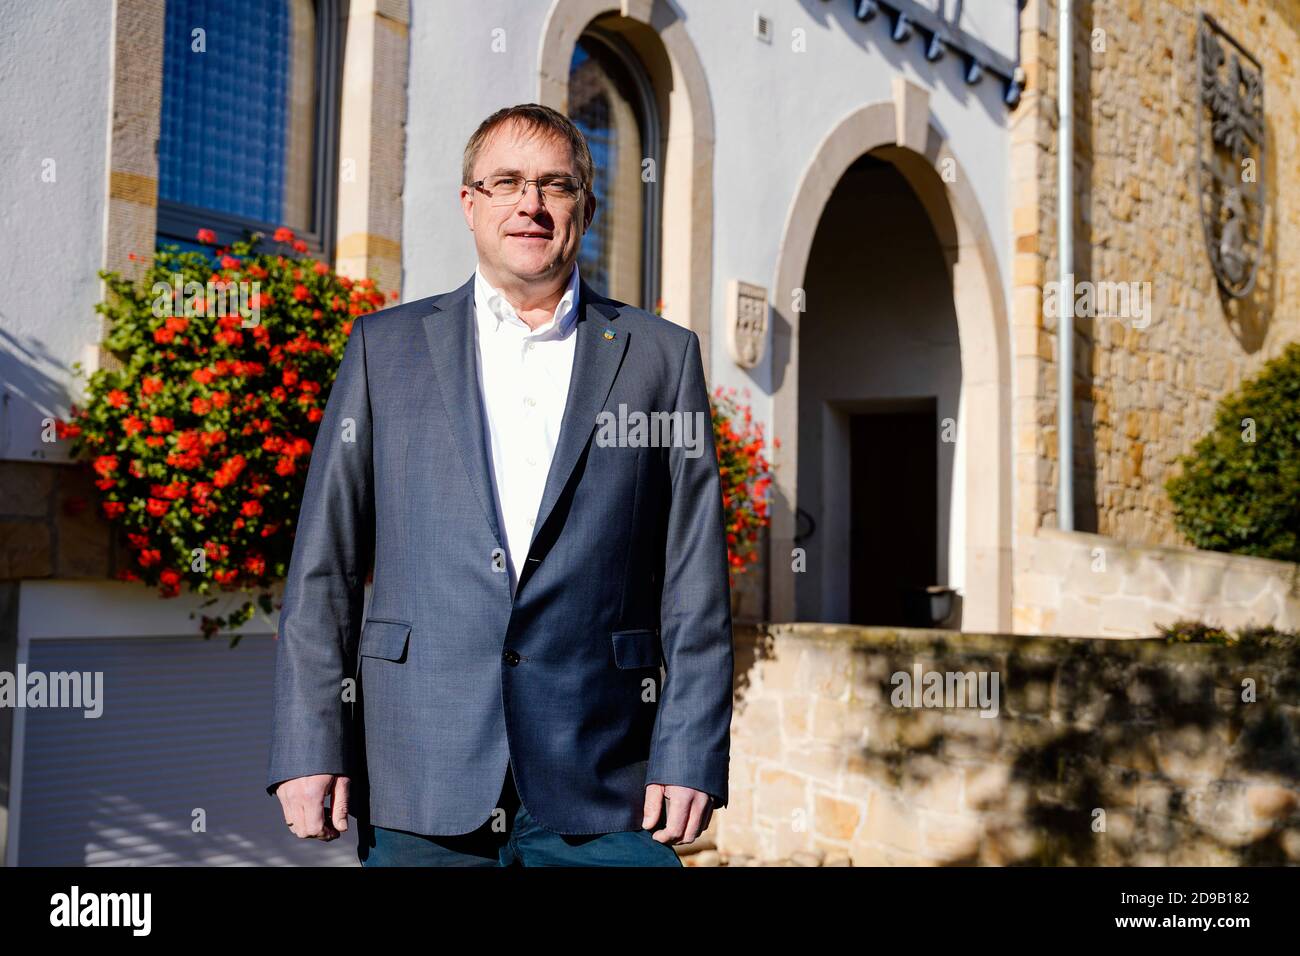 04 November 2020, Rhineland-Palatinate, Kallstadt: Thomas Jaworek, local mayor of the municipality of Kallstadt, stands in front of the community centre. Kallstadt was the residence of the ancestors on the father's side of US President Trump. Photo: Uwe Anspach/dpa Stock Photo